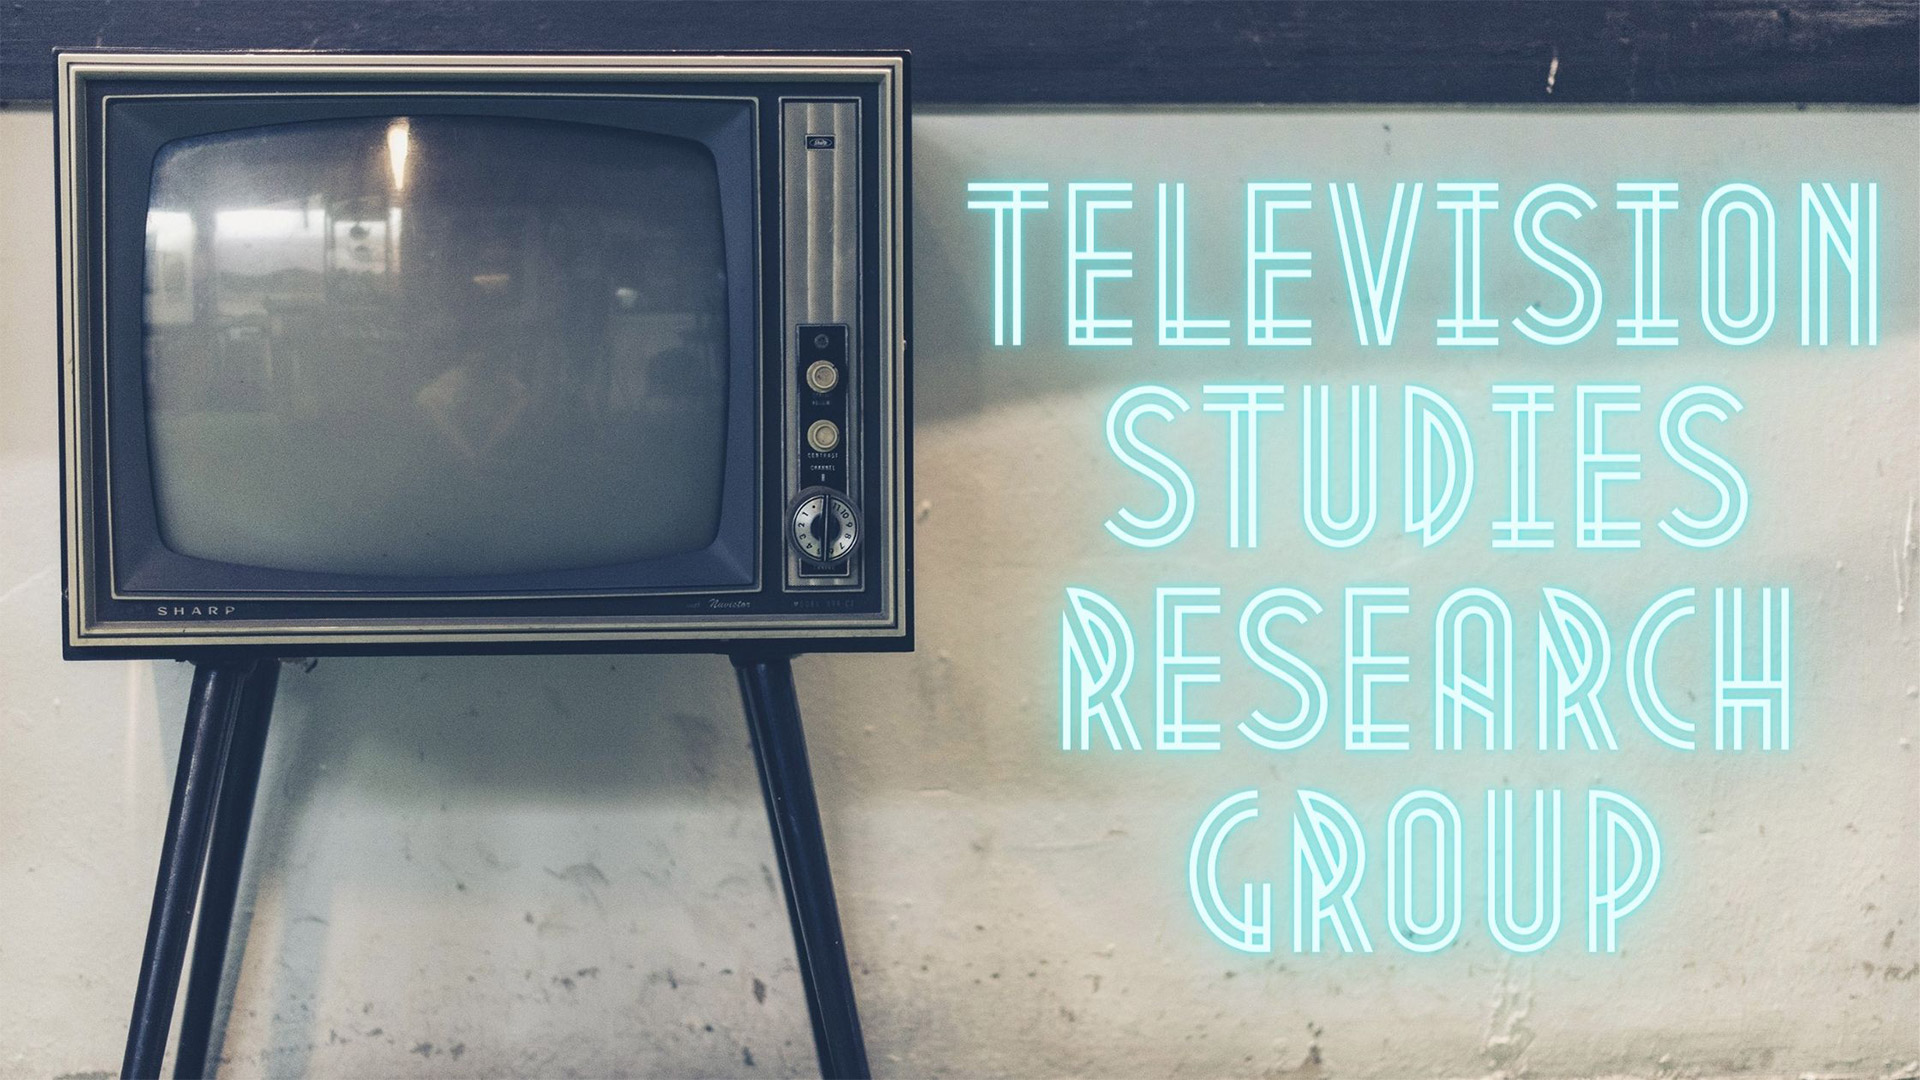 Television studies research group